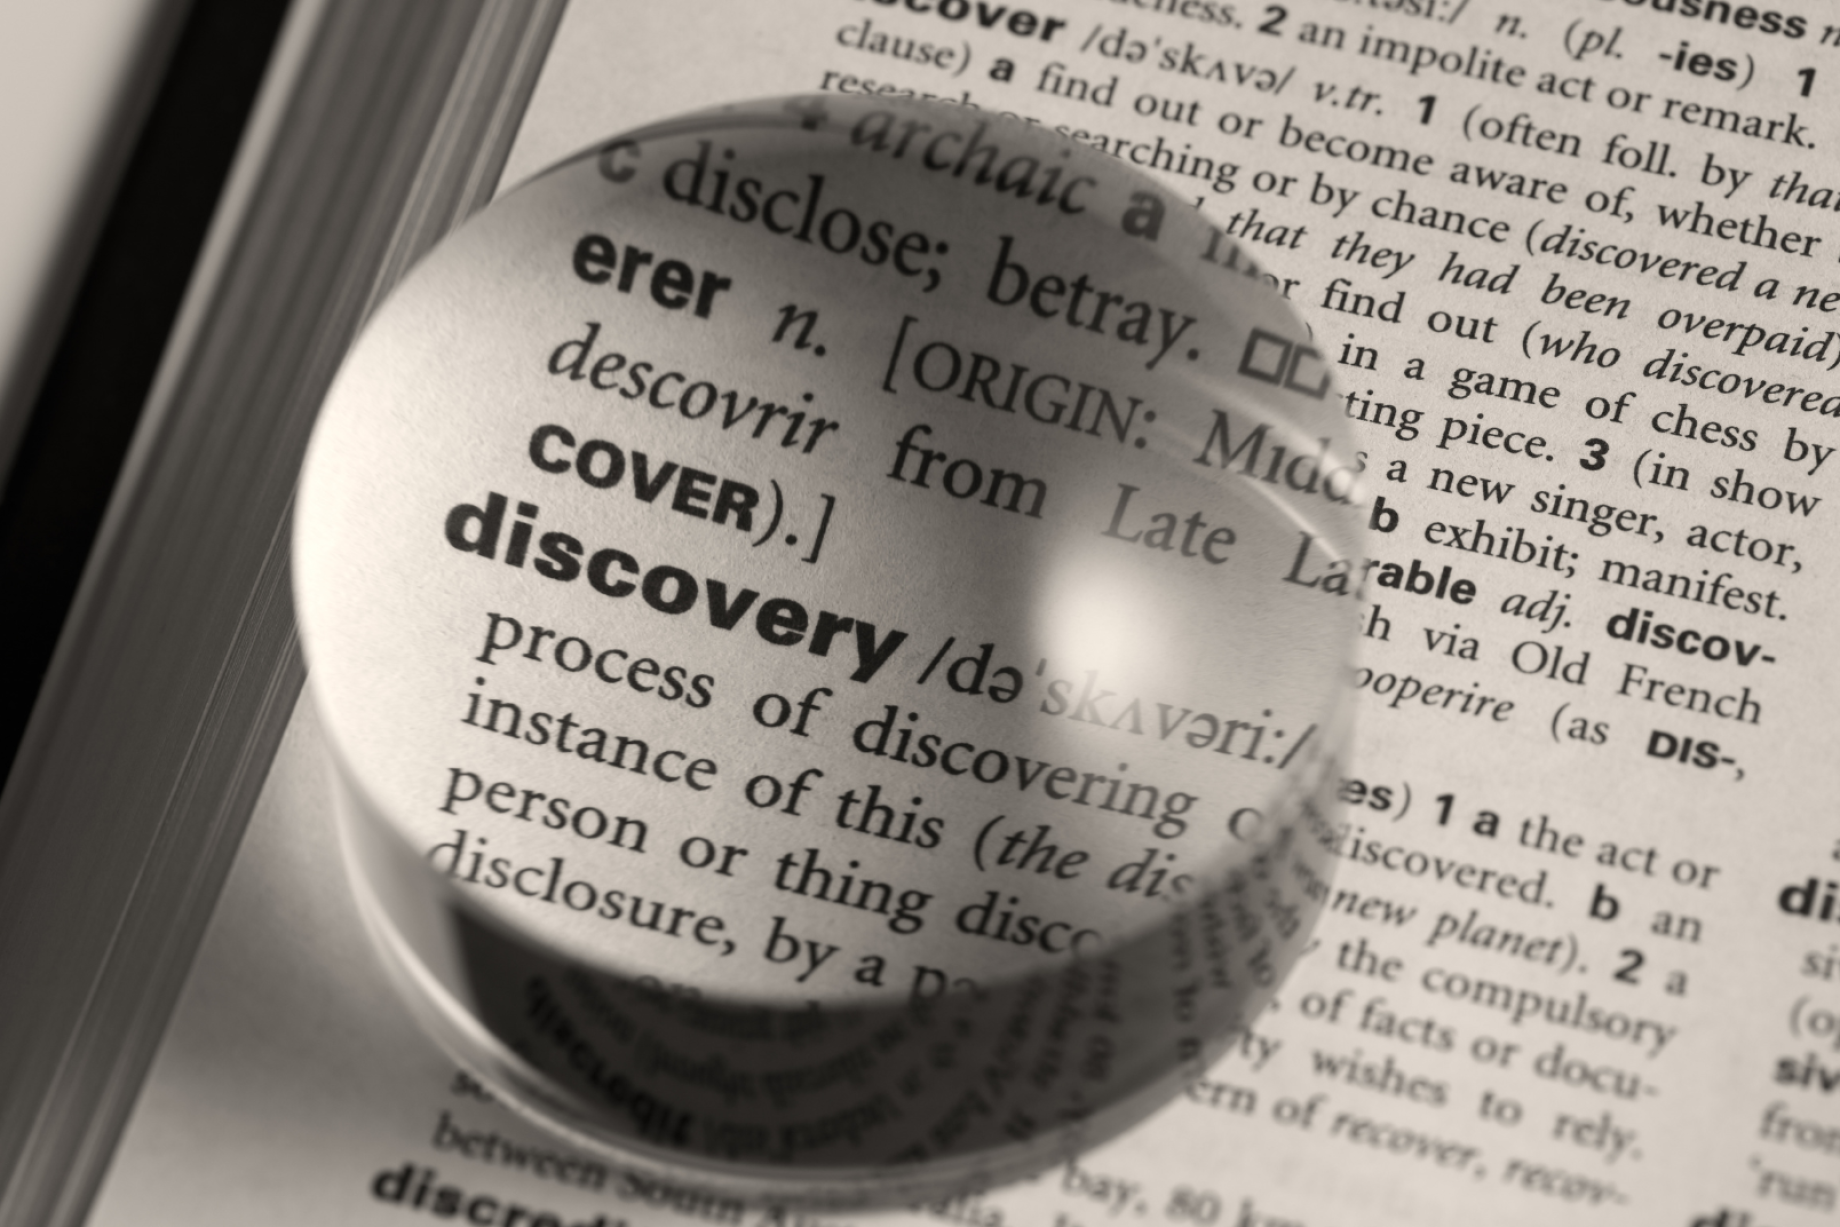 Word "discovery" emphasized.